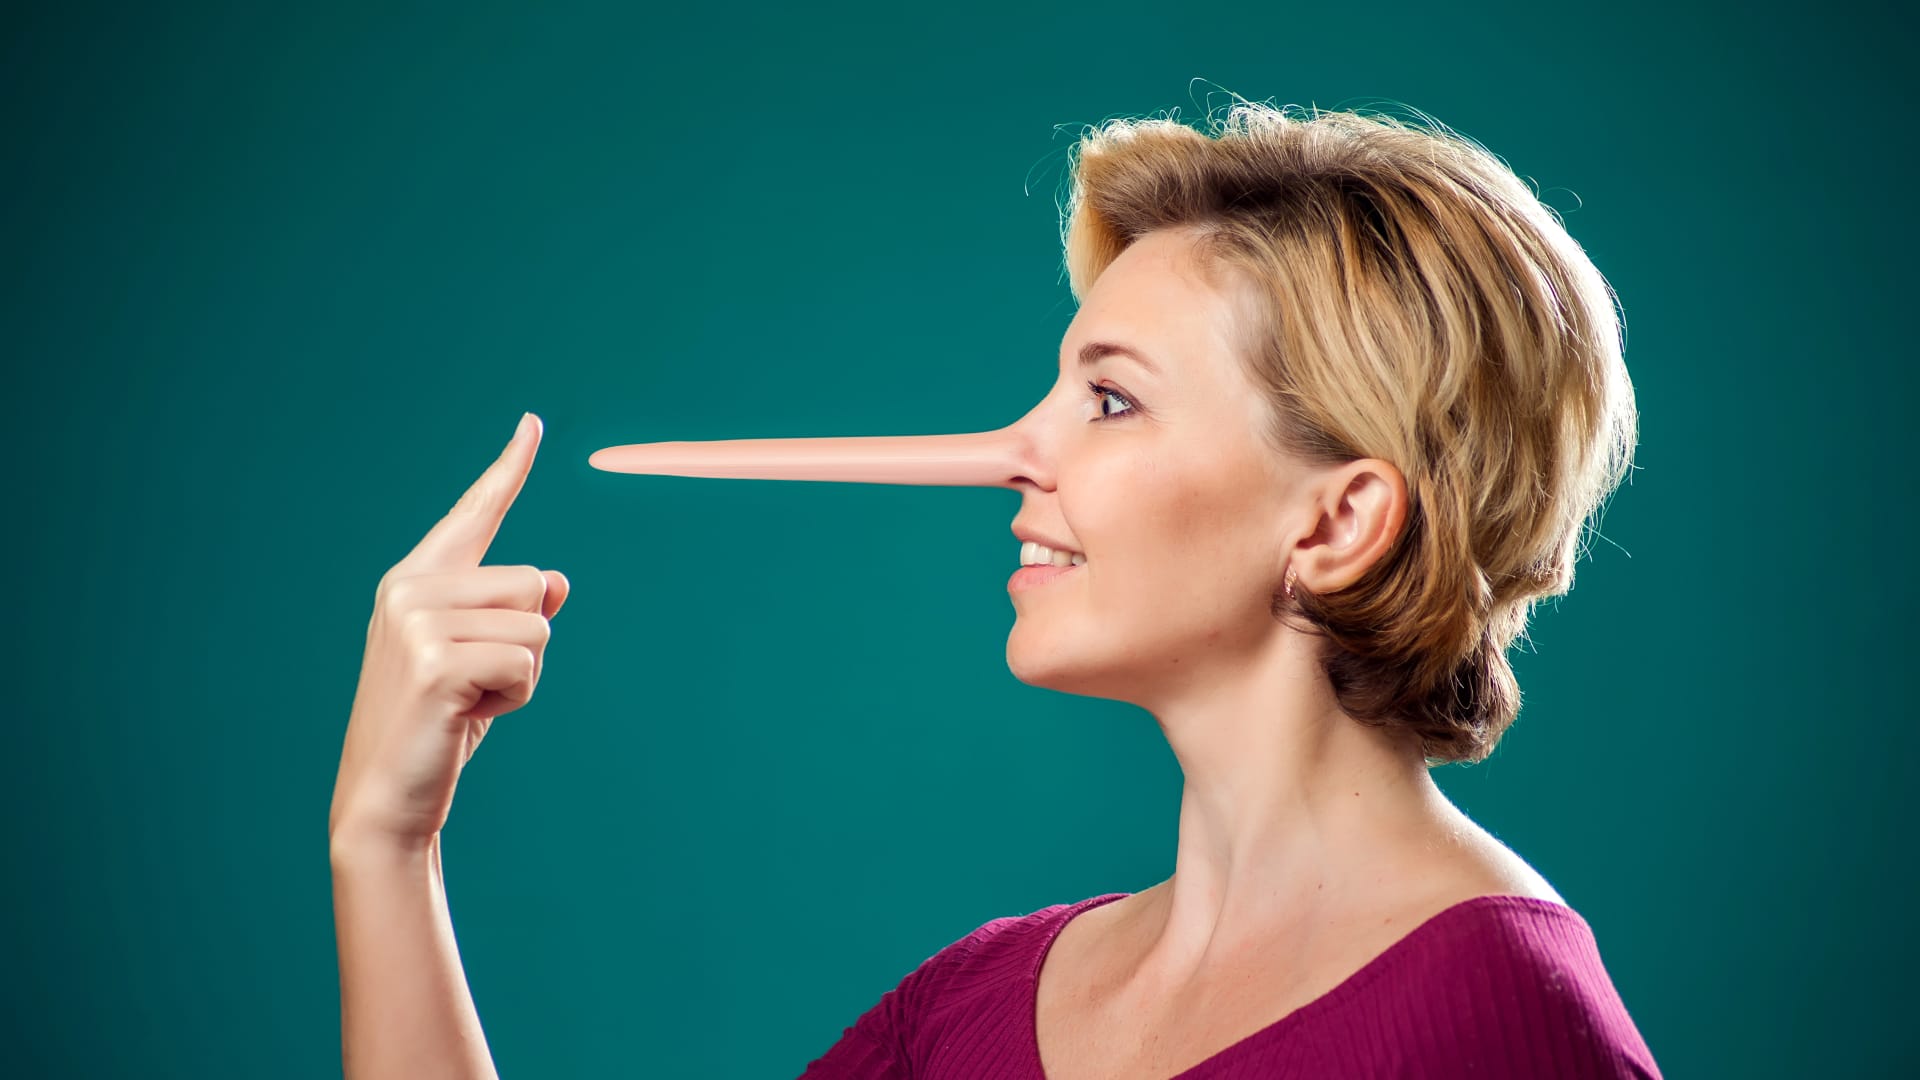 Watch out for these 9 biggest signs that someone is lying to you, say psychology experts